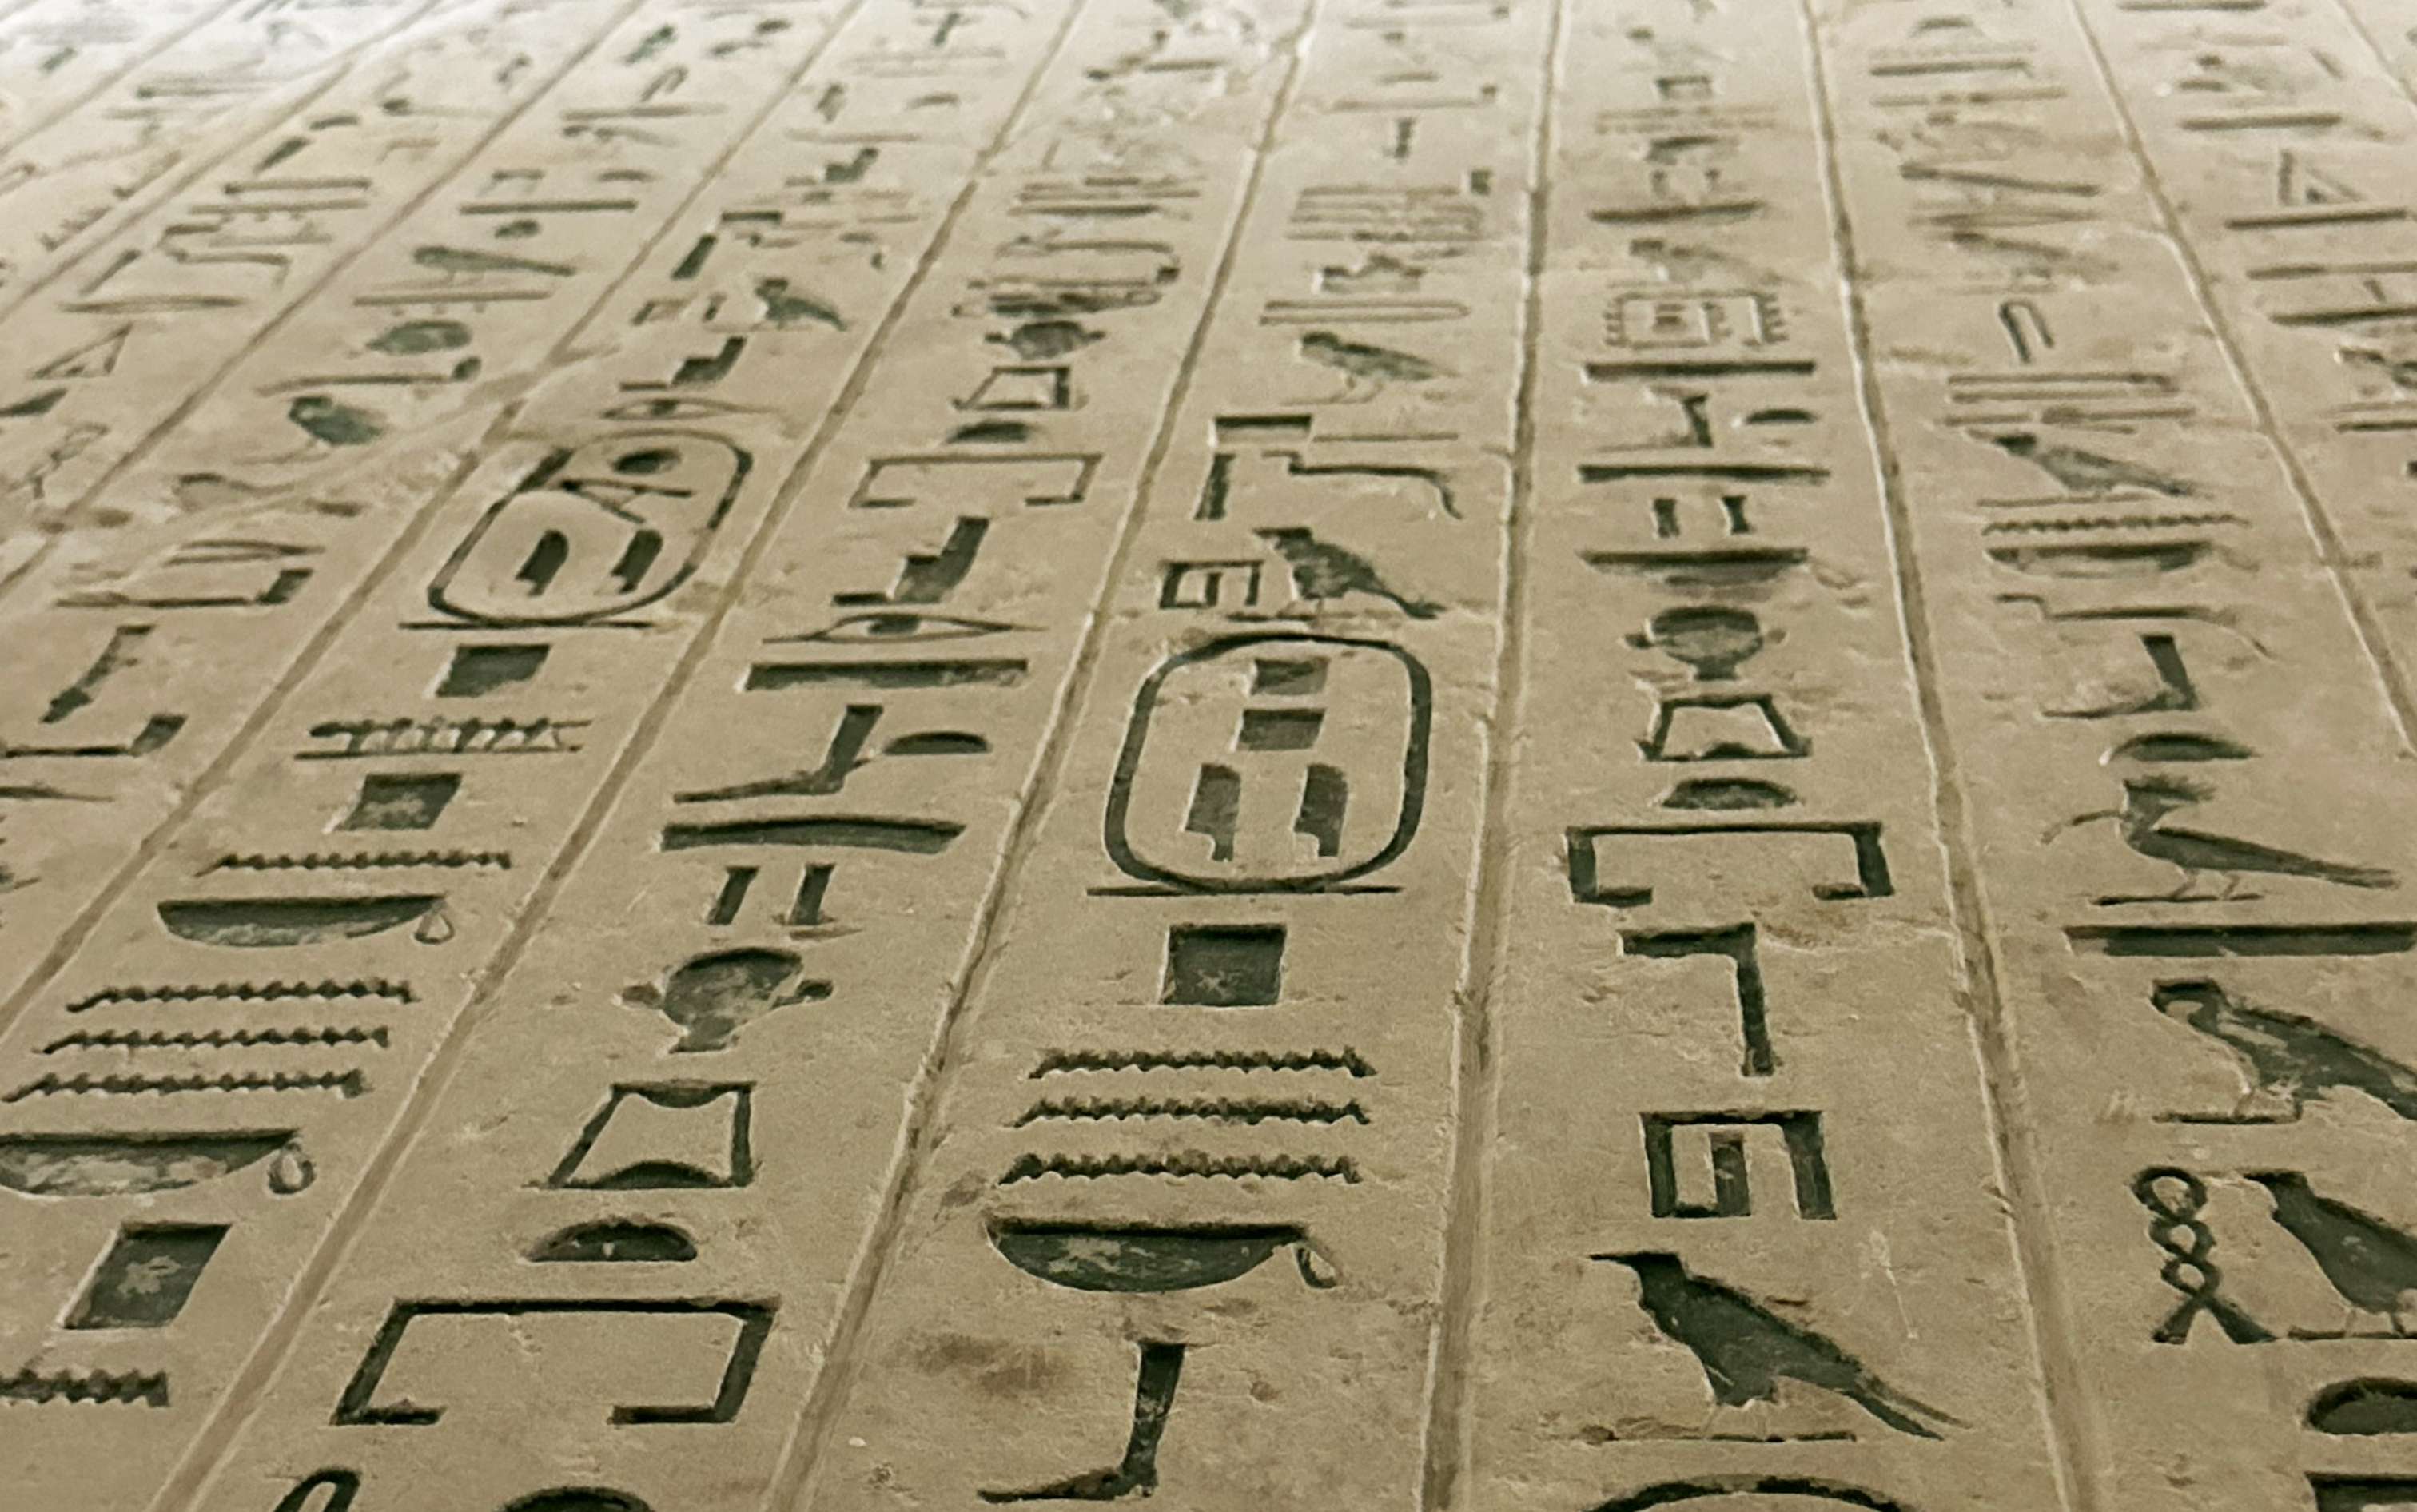 image of hieroglyphics carved into walls of tomb